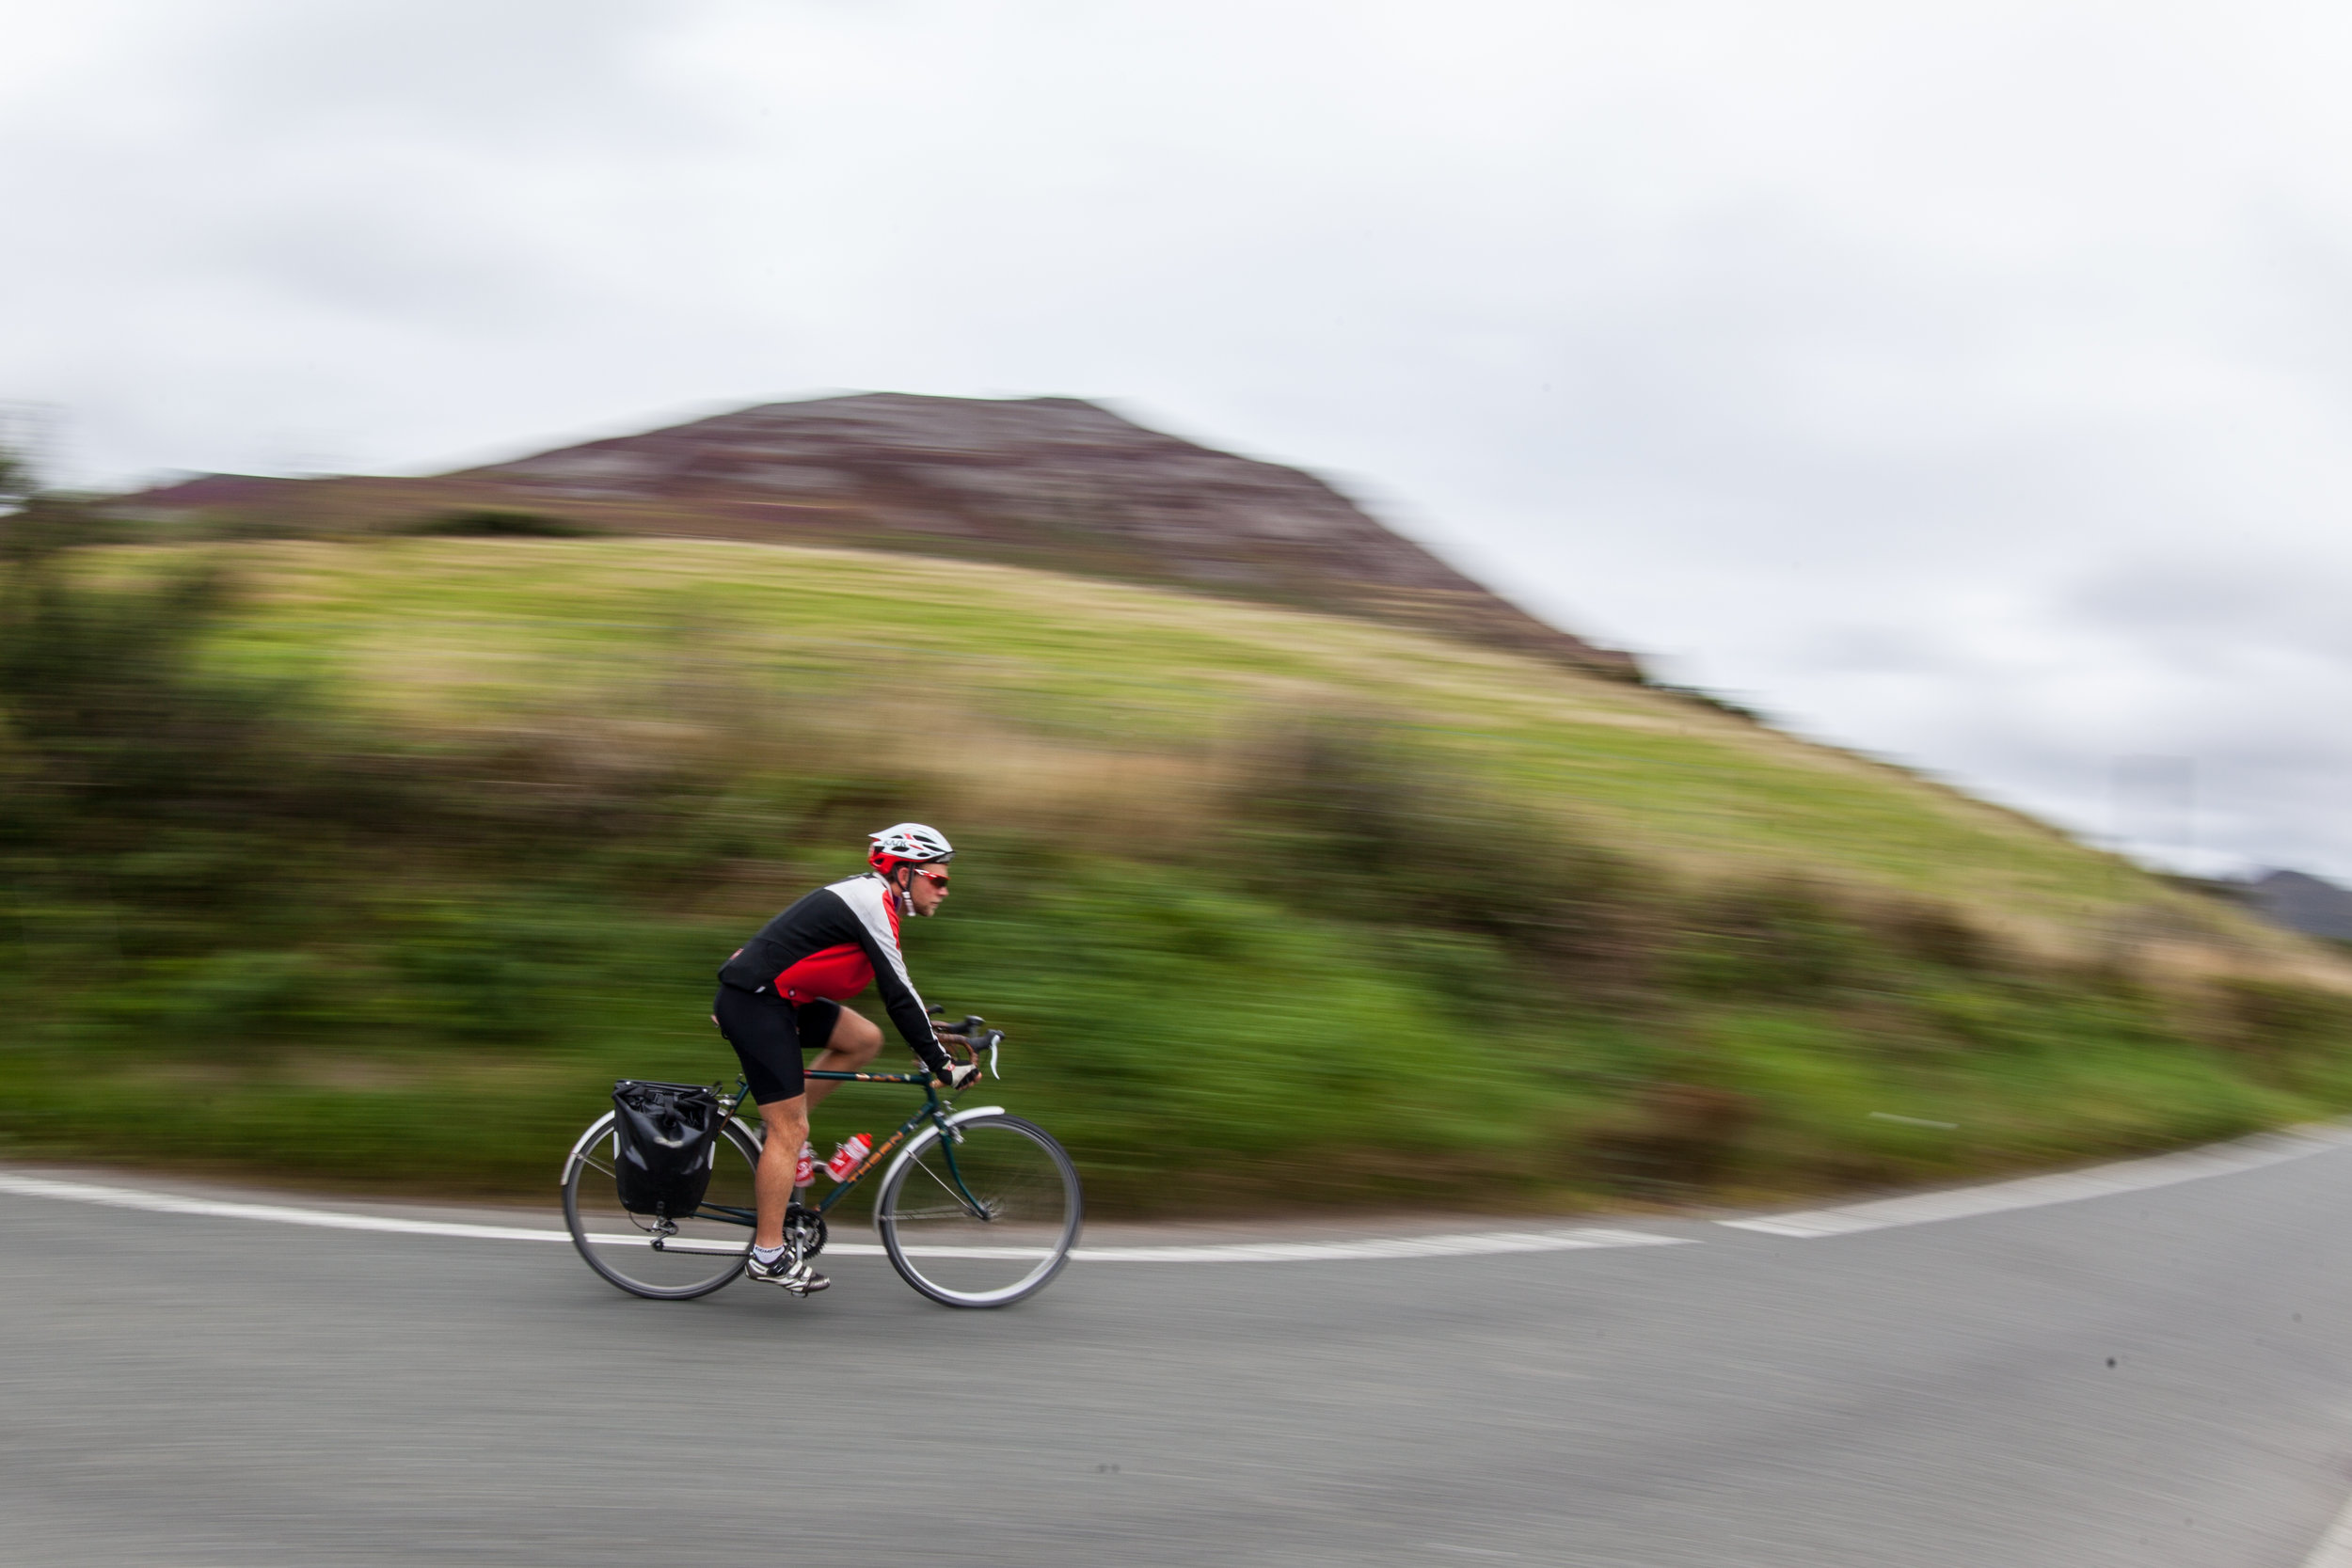 James cope riding fast in North Wales.